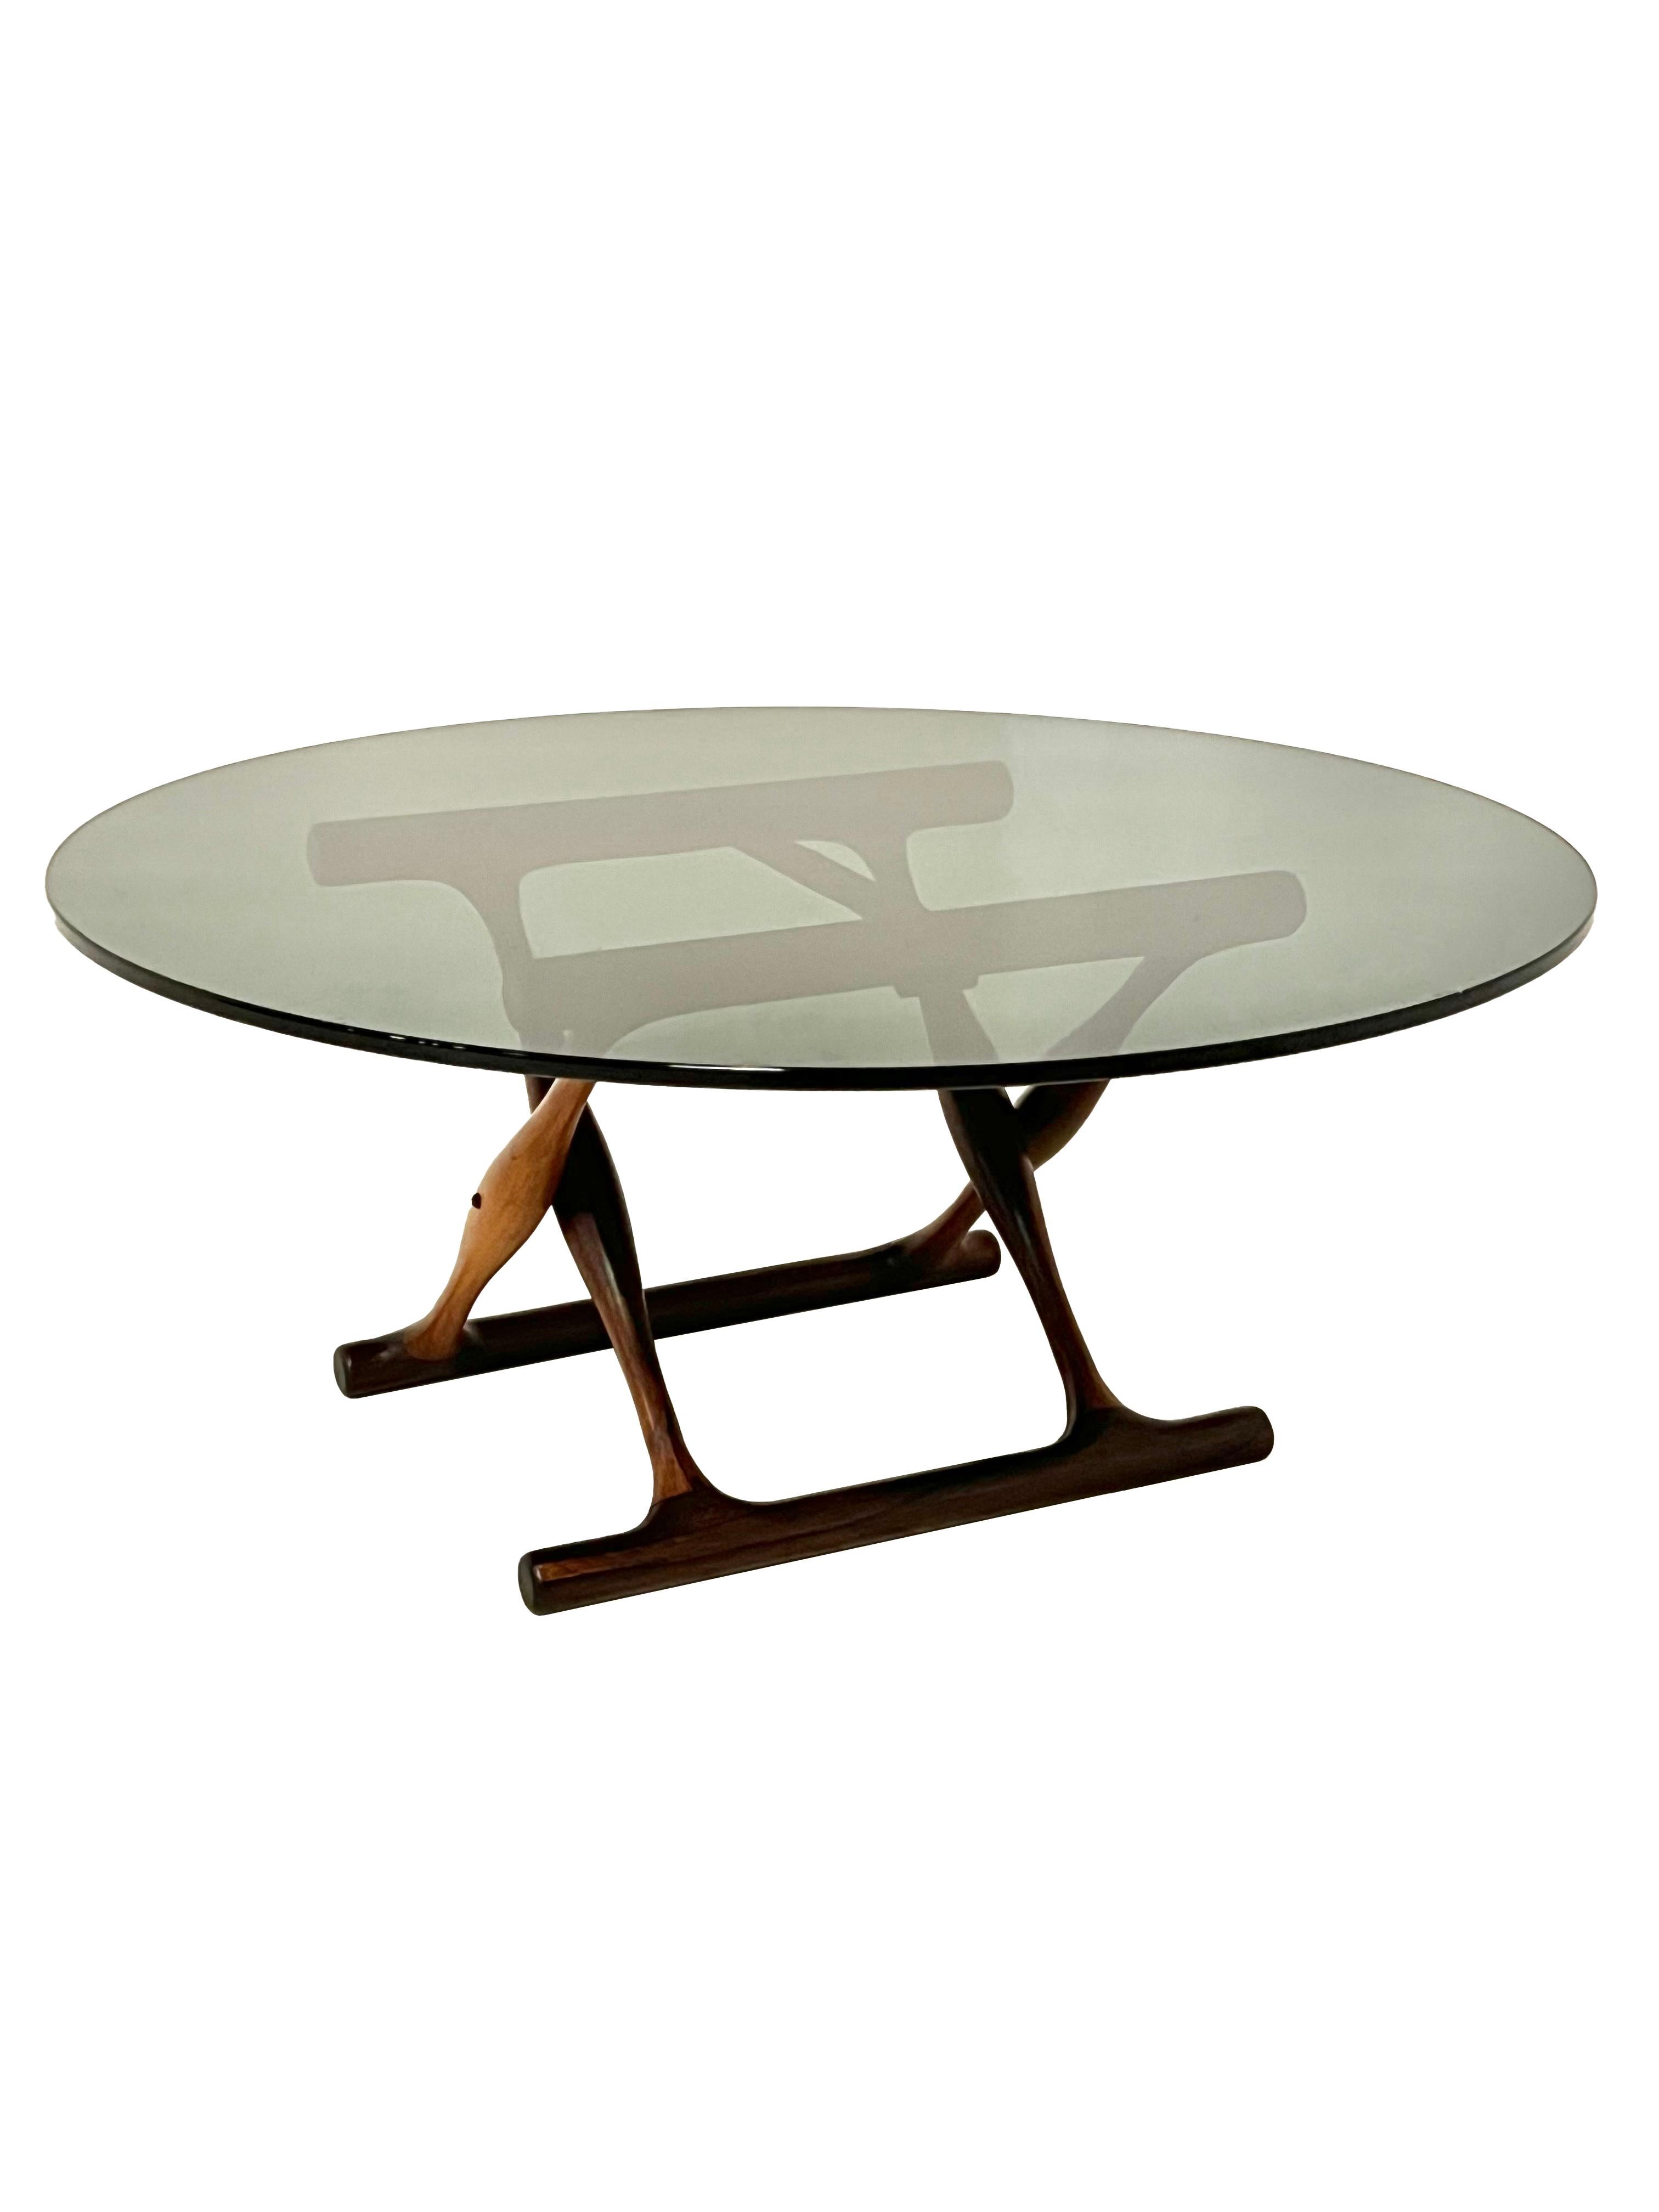 Scandinavian Modern Poul Hundevad, Very Rare “Guldhoj-Table” in Rosewood and Smoked Glass